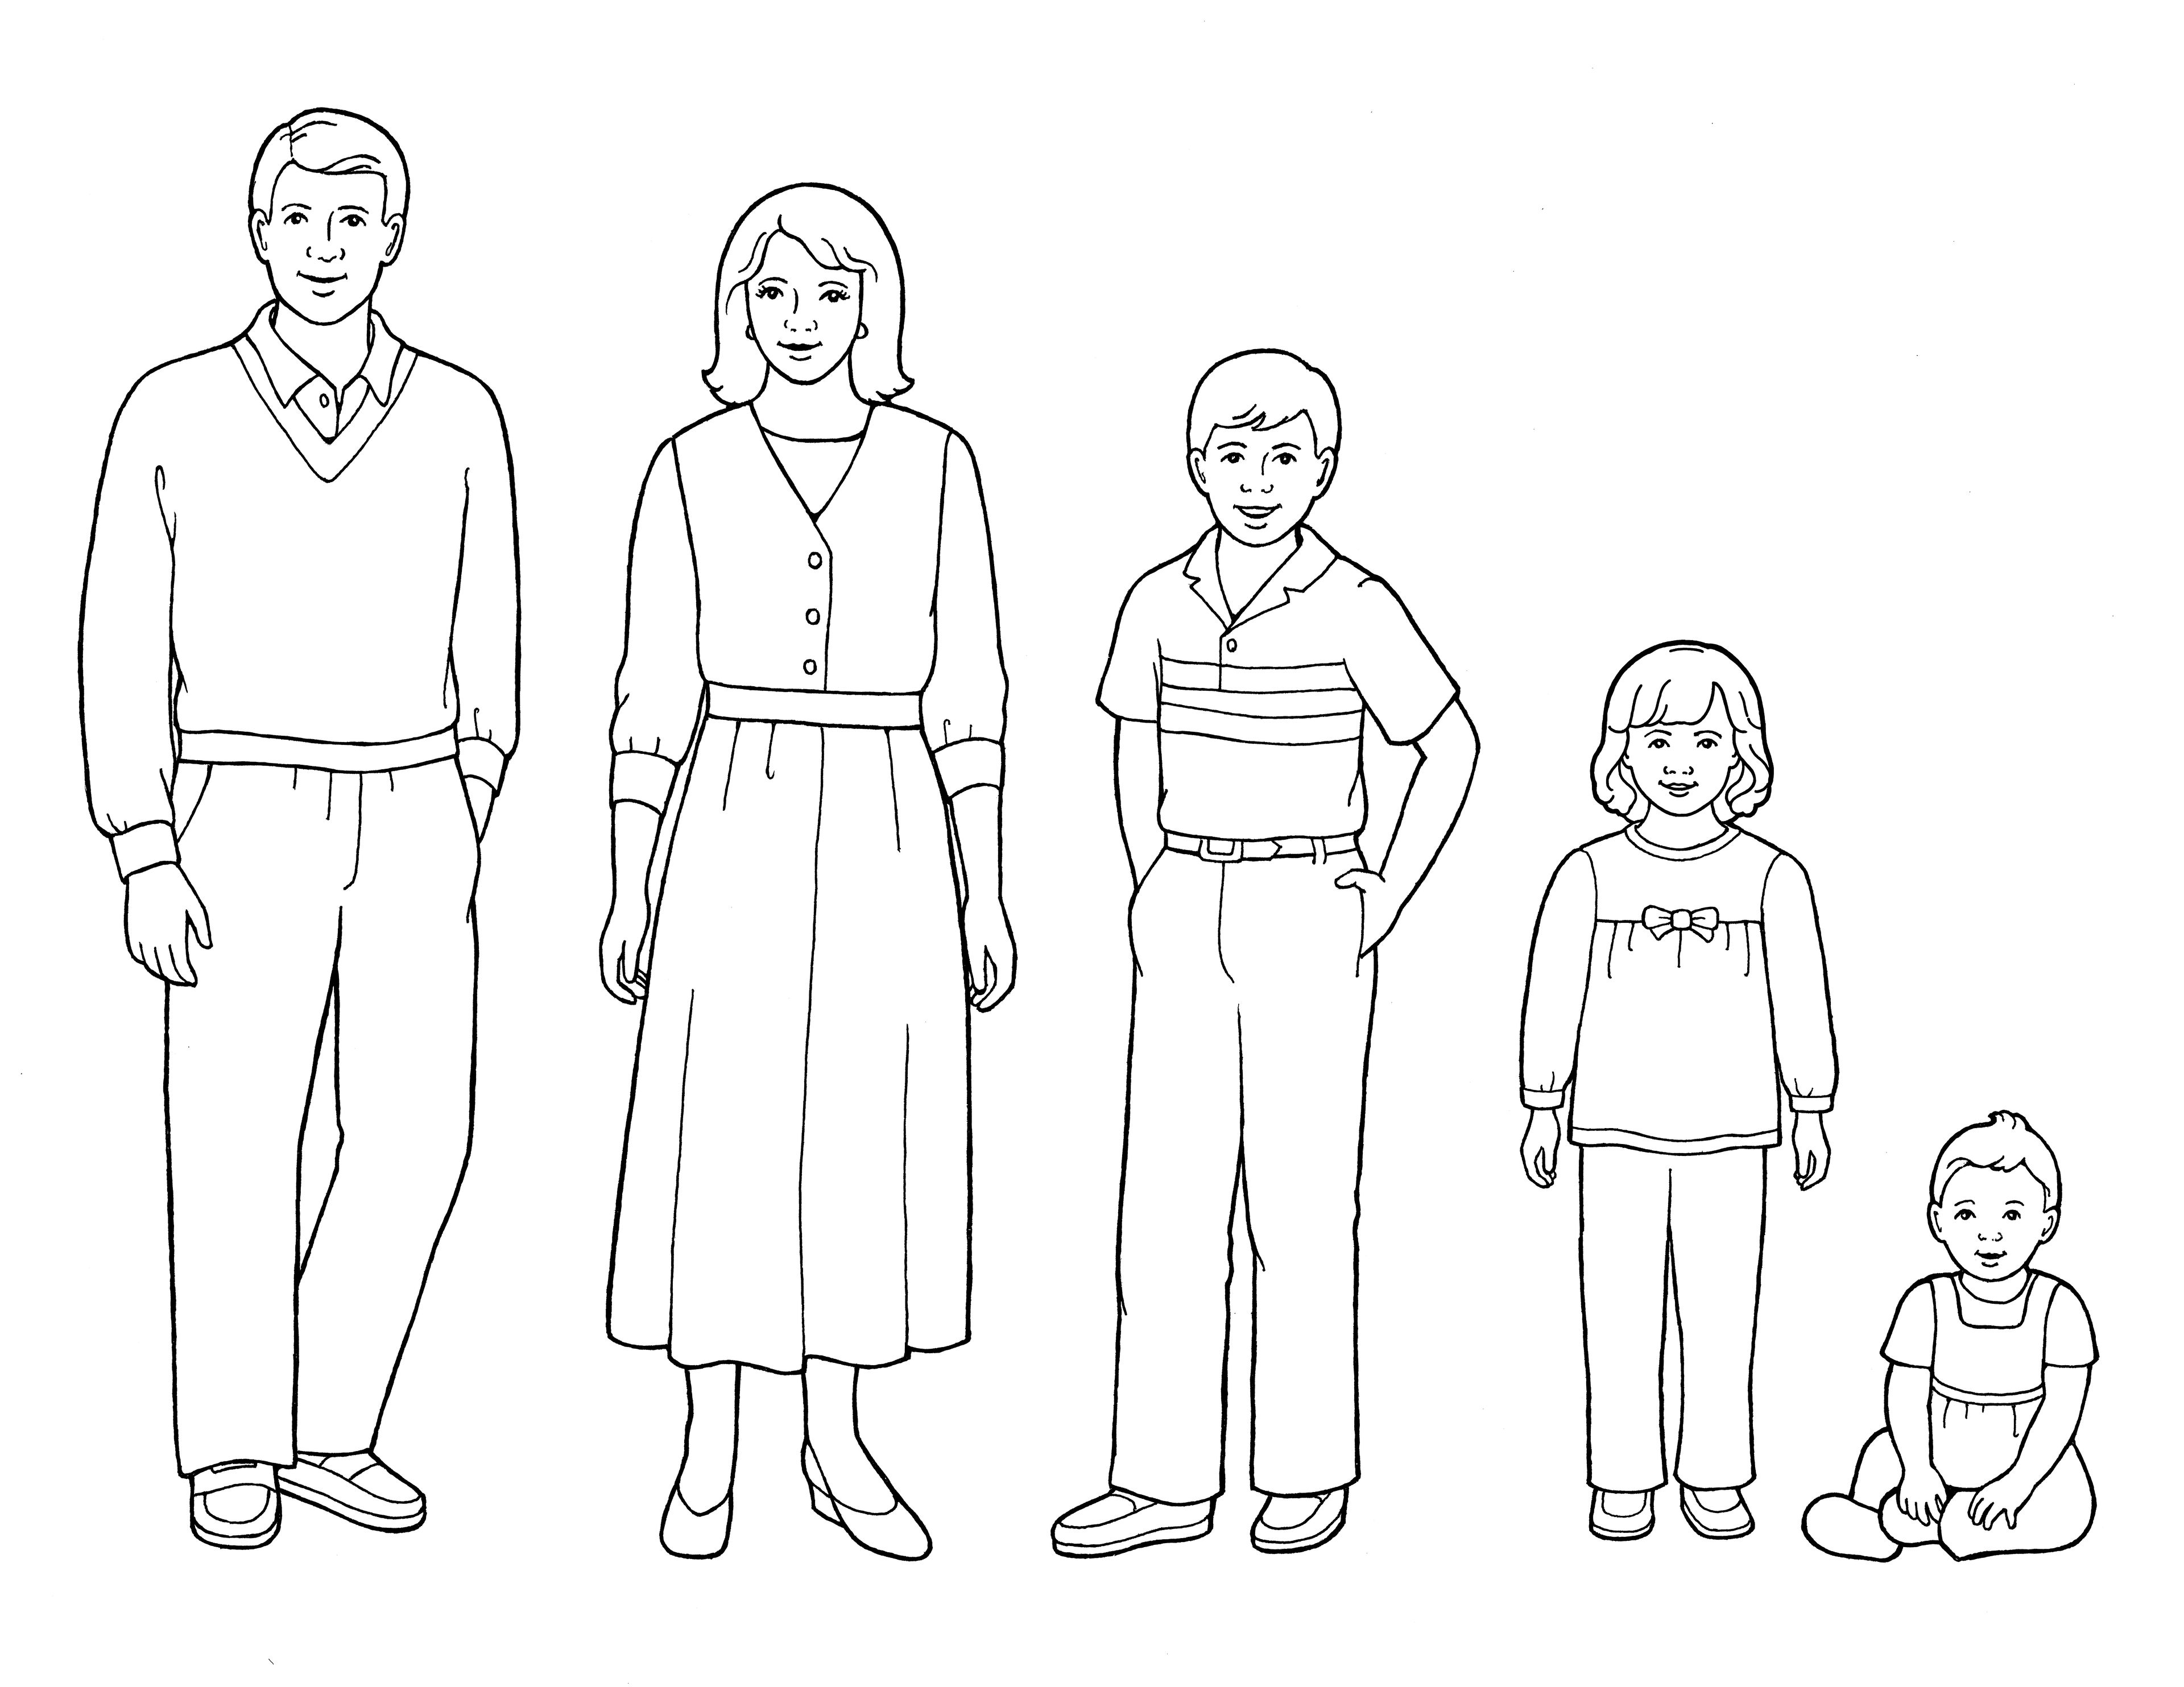 An illustration of a family walking with a child in a stroller, from the nursery manual Behold Your Little Ones (2008), page 59.